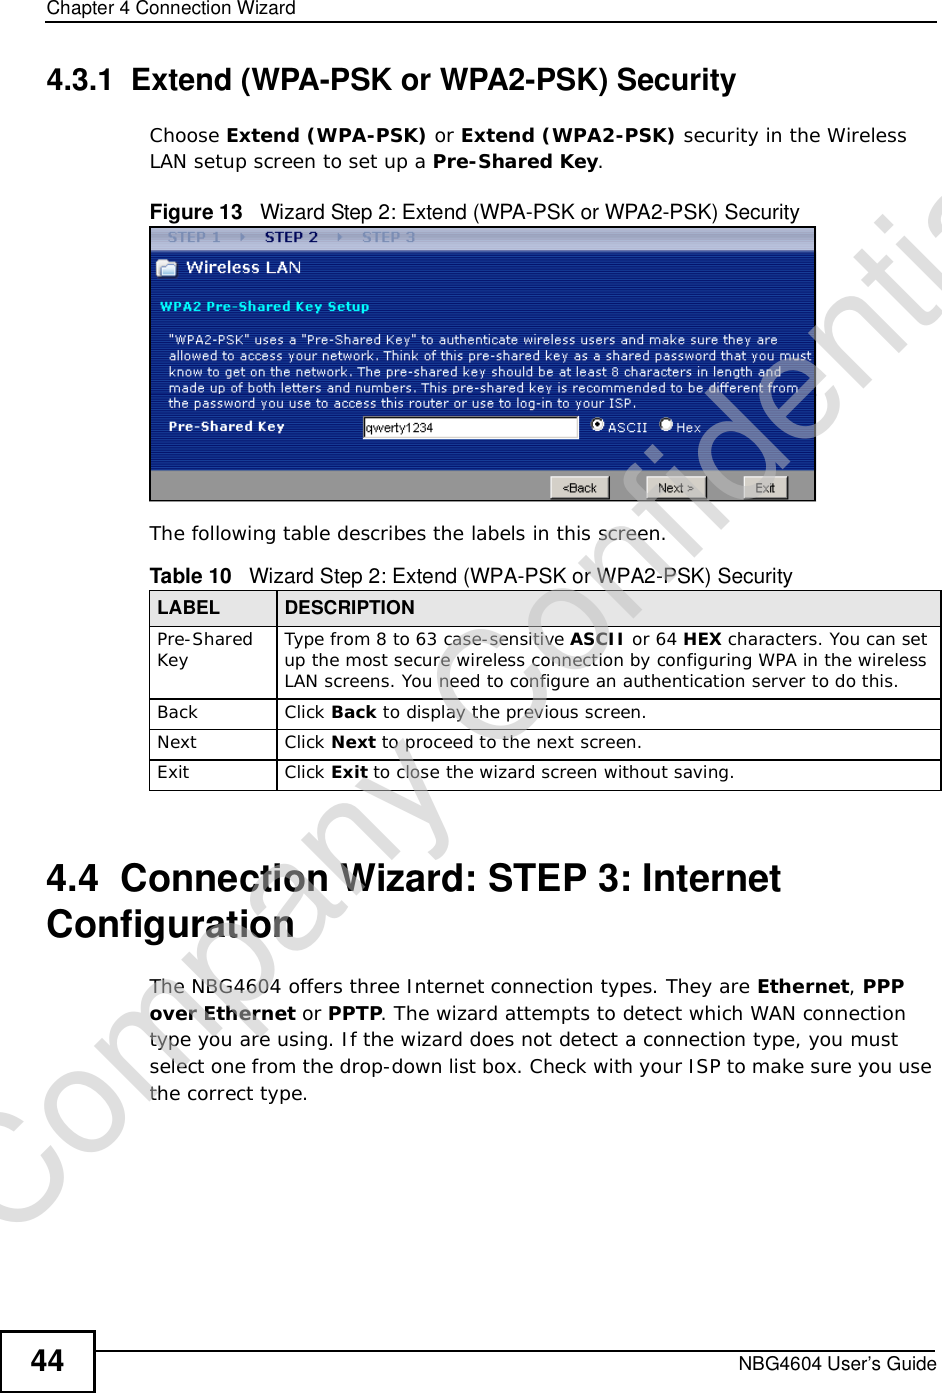 Chapter 4Connection WizardNBG4604 User’s Guide444.3.1  Extend (WPA-PSK or WPA2-PSK) SecurityChoose Extend (WPA-PSK) or Extend (WPA2-PSK) security in the Wireless LAN setup screen to set up a Pre-Shared Key.Figure 13   Wizard Step 2: Extend (WPA-PSK or WPA2-PSK) SecurityThe following table describes the labels in this screen. 4.4  Connection Wizard: STEP 3: Internet ConfigurationThe NBG4604 offers three Internet connection types. They are Ethernet,PPP over Ethernet or PPTP. The wizard attempts to detect which WAN connection type you are using. If the wizard does not detect a connection type, you must select one from the drop-down list box. Check with your ISP to make sure you use the correct type.Table 10   Wizard Step 2: Extend (WPA-PSK or WPA2-PSK) SecurityLABEL DESCRIPTIONPre-SharedKey Type from 8 to 63 case-sensitive ASCII or 64 HEX characters. You can set up the most secure wireless connection by configuring WPA in the wireless LAN screens. You need to configure an authentication server to do this.Back Click Back to display the previous screen.Next Click Next to proceed to the next screen. Exit Click Exit to close the wizard screen without saving.Company Confidential